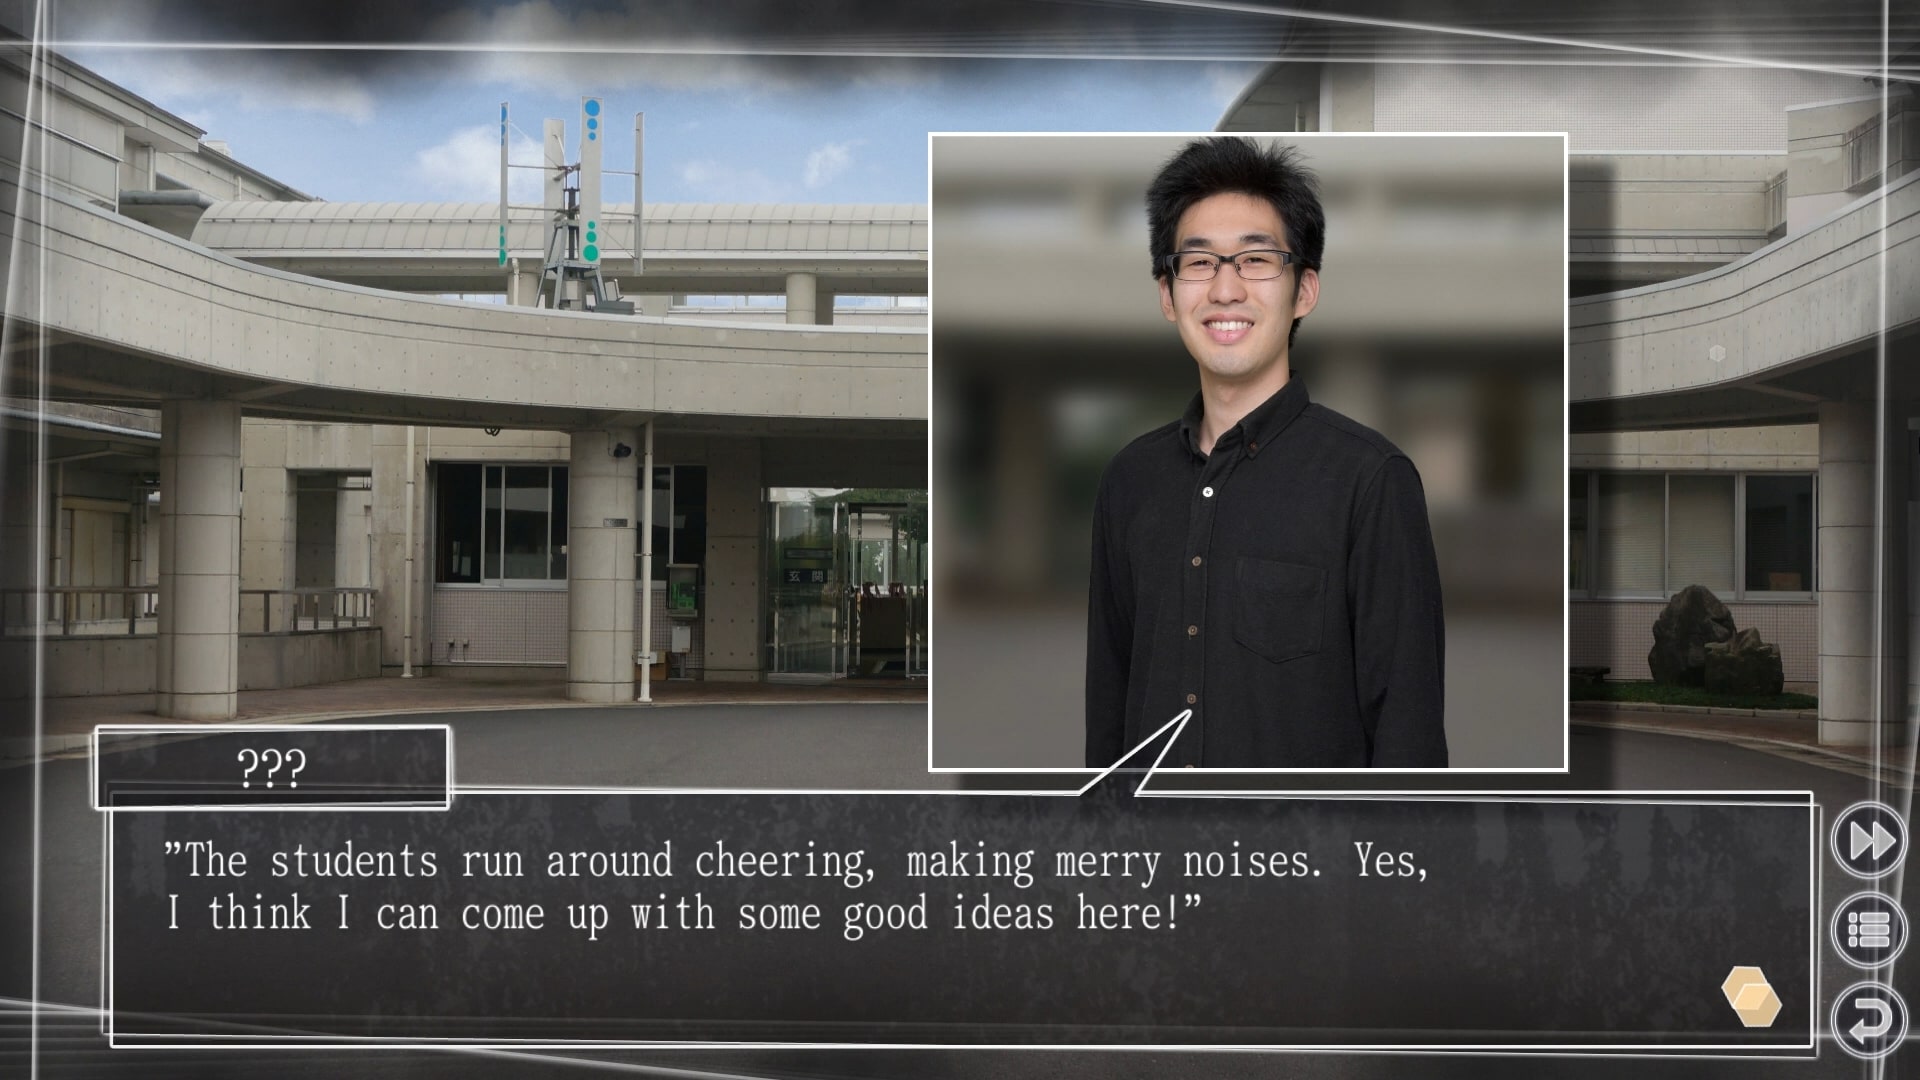 Root Letter Last Answer Additional Scenarios for Root Letter Last Answer Walkthrough - Scenario 1: Wandering Traveler - 8570AD2